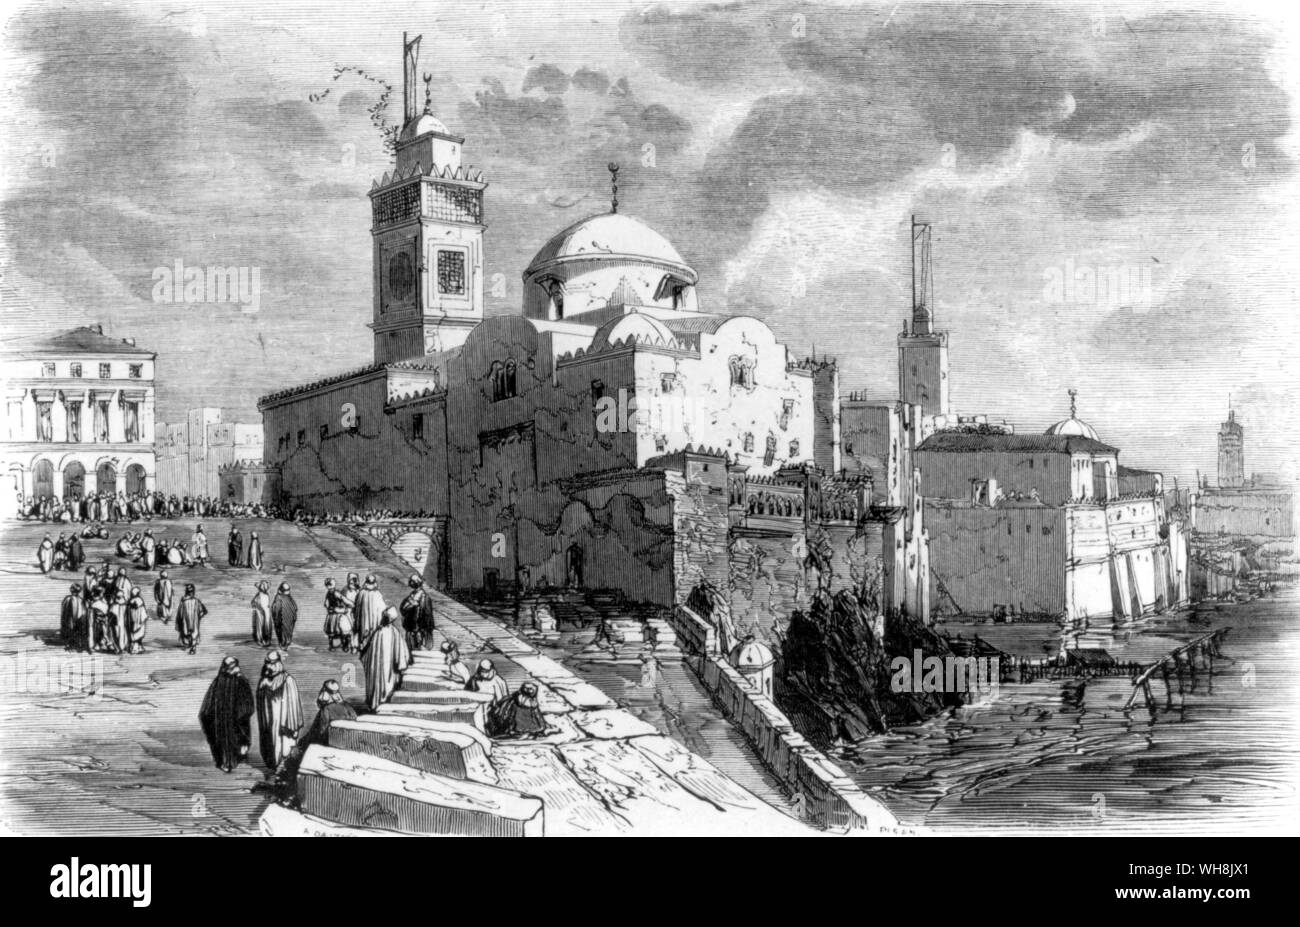 Algiers before the French occupation in 1830. Stock Photo